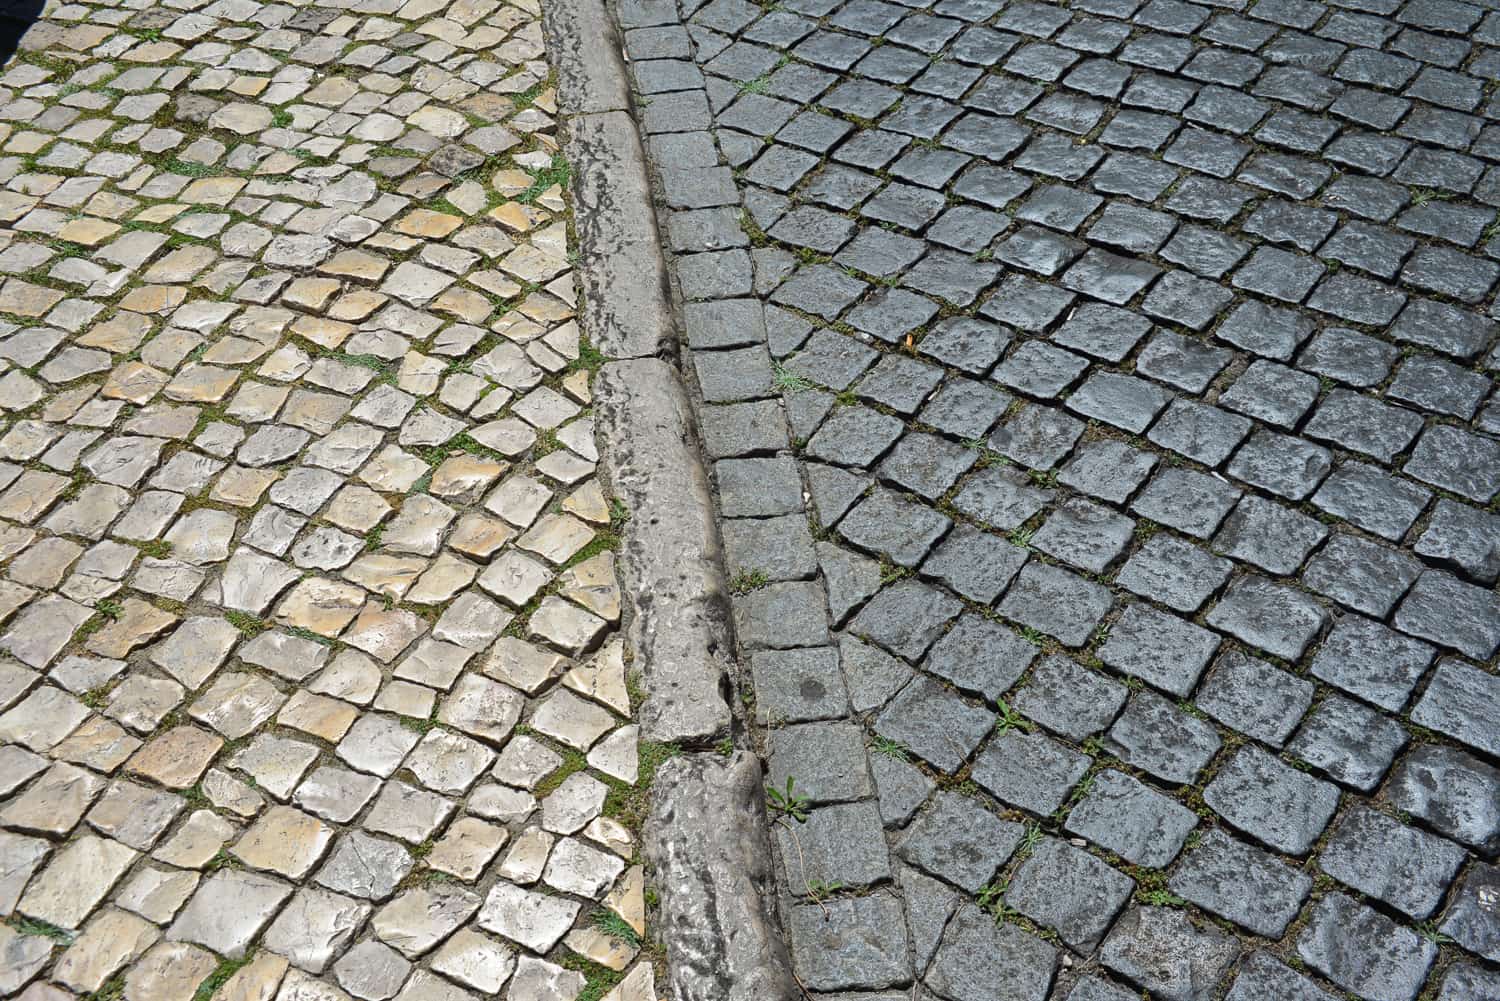 Cobbles on the road ... cobbles on the pavement.